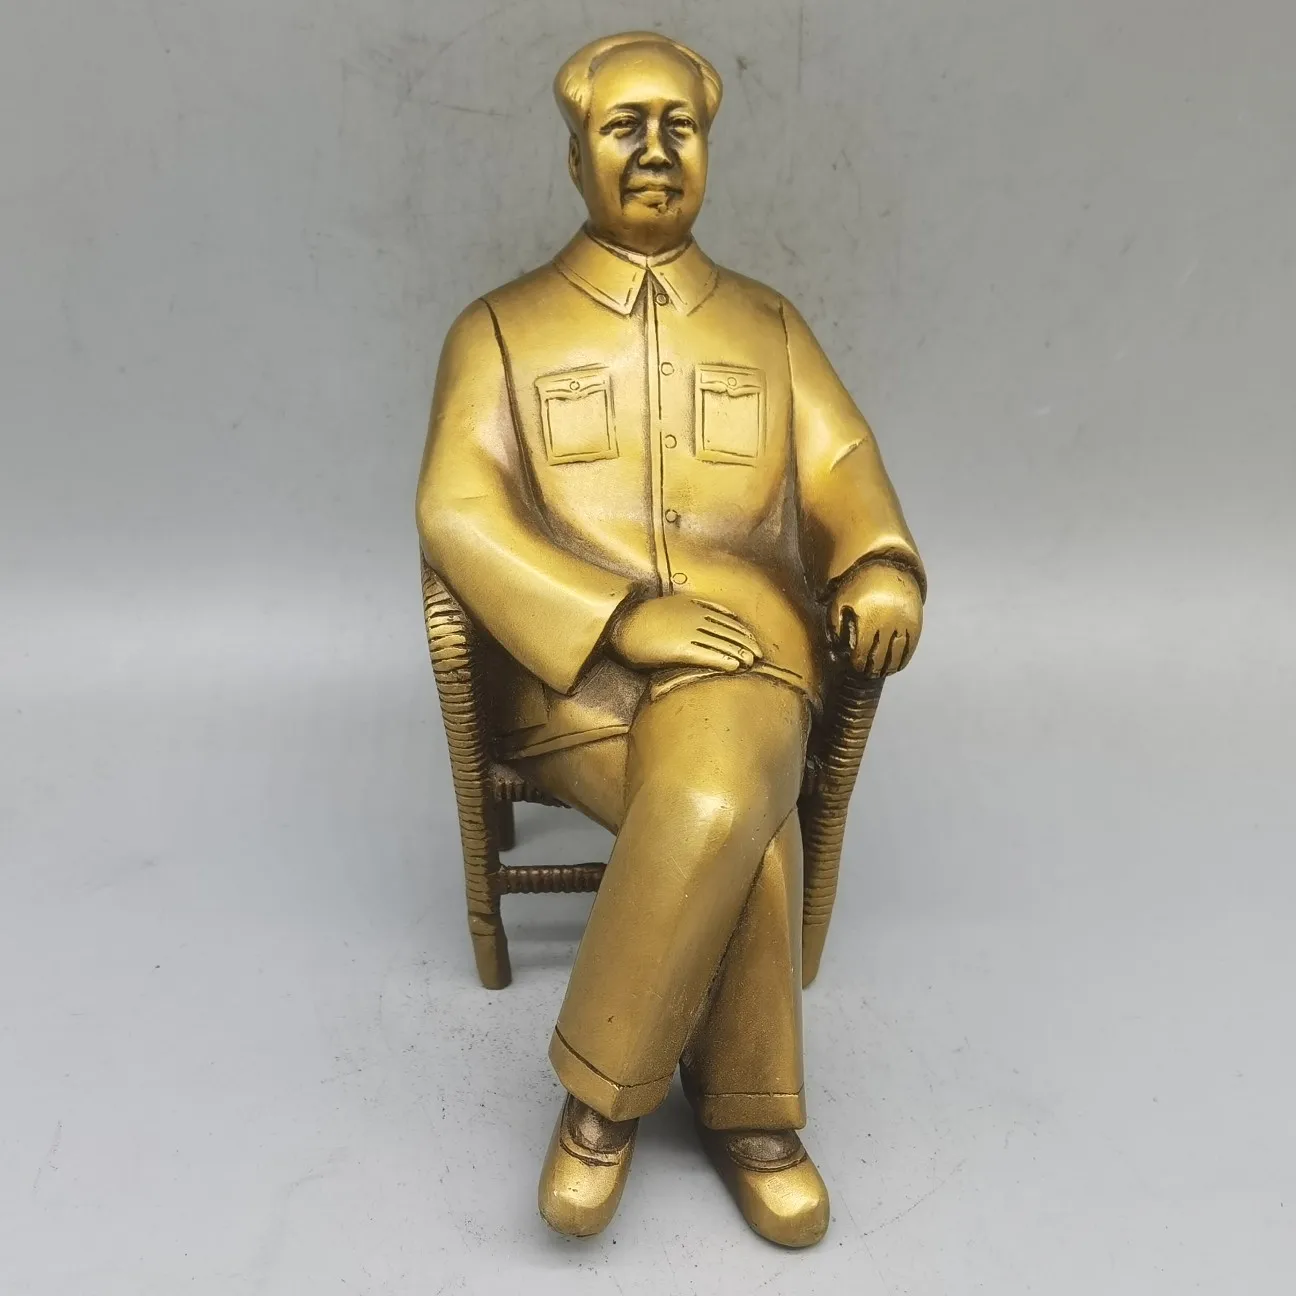 

MOEHOMES China copper crafts fengshui mercy Great leader Chairman Mao Zedong statue vintage family decoration metal handicraft